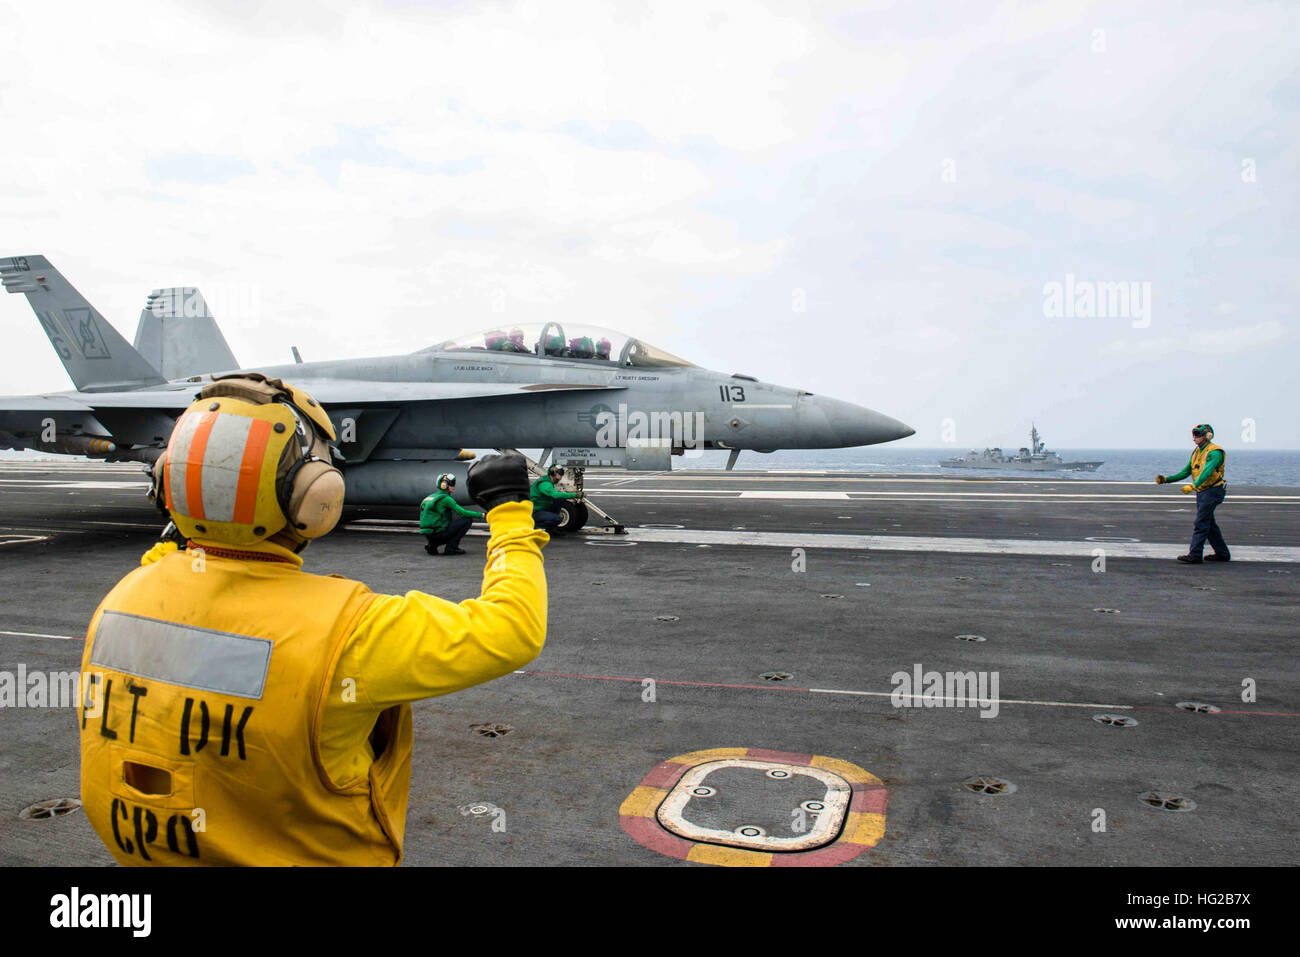 16022-N-DA737-055 PHILIPPINE SEA (Feb. 22, 2016) - Sailors prepare an F/A-18F Super Hornet assigned to the Black Aces of Strike Fighter Squadron (VFA) 41 for launch on USS John C. Stennis' (CVN 74) flight deck while Japanese Maritime Self-Defense Force Murasame-class destroyer JDS Murasame (DD-106) steams alongside. Providing a ready force supporting security and stability in the Indo-Asia-Pacific, Stennis is operating as part of the Great Green Fleet on a regularly scheduled 7th Fleet deployment. (U.S. Navy photo by Mass Communication Specialist 2nd Class Jonathan Jiang / Released) USS John C Stock Photo